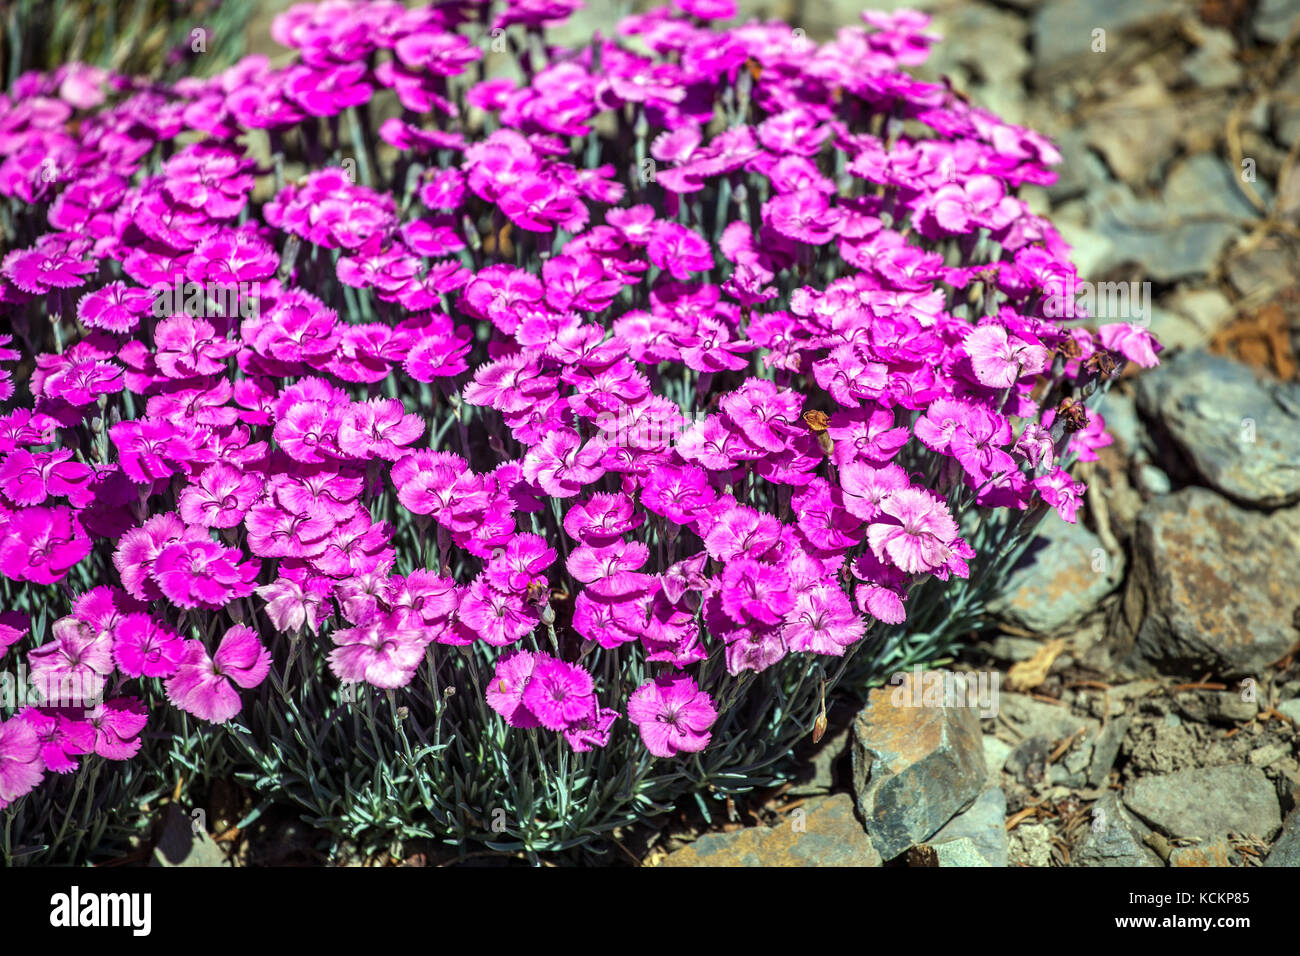 Dianthus 'Whatfield Magenta' Purple Rockery Garden Flowers Blooming Deep Pink Blooms Alpine Plant Growing Dry Ground Cover Place Dianthus Tuft Blooms Foto Stock